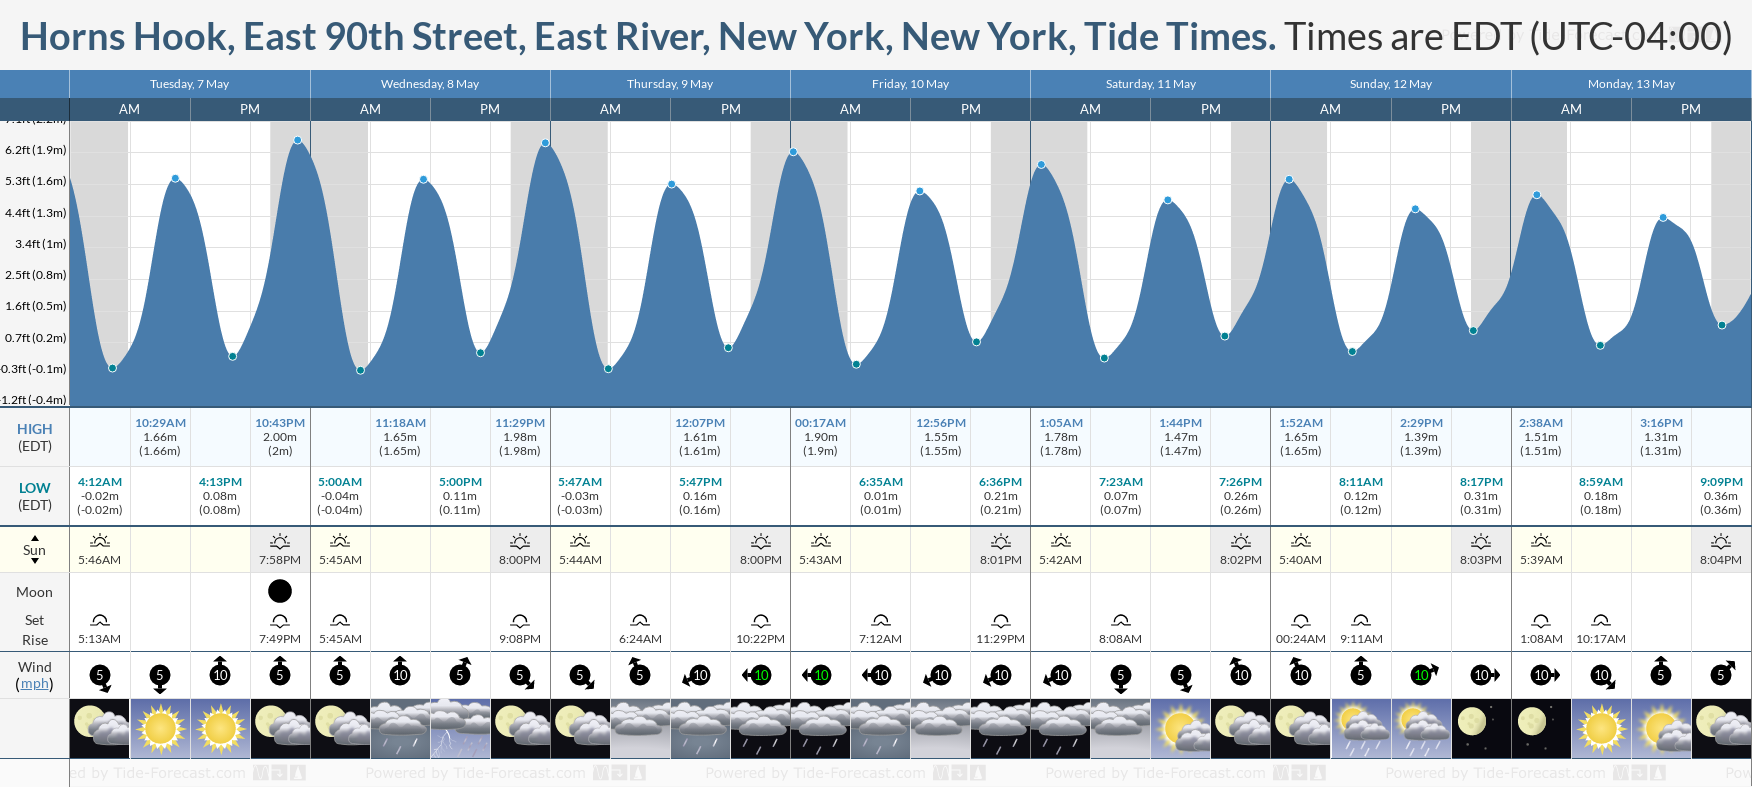 Horns Hook, East 90th Street, East River, New York, New York Tide Chart including high and low tide tide times for the next 7 days